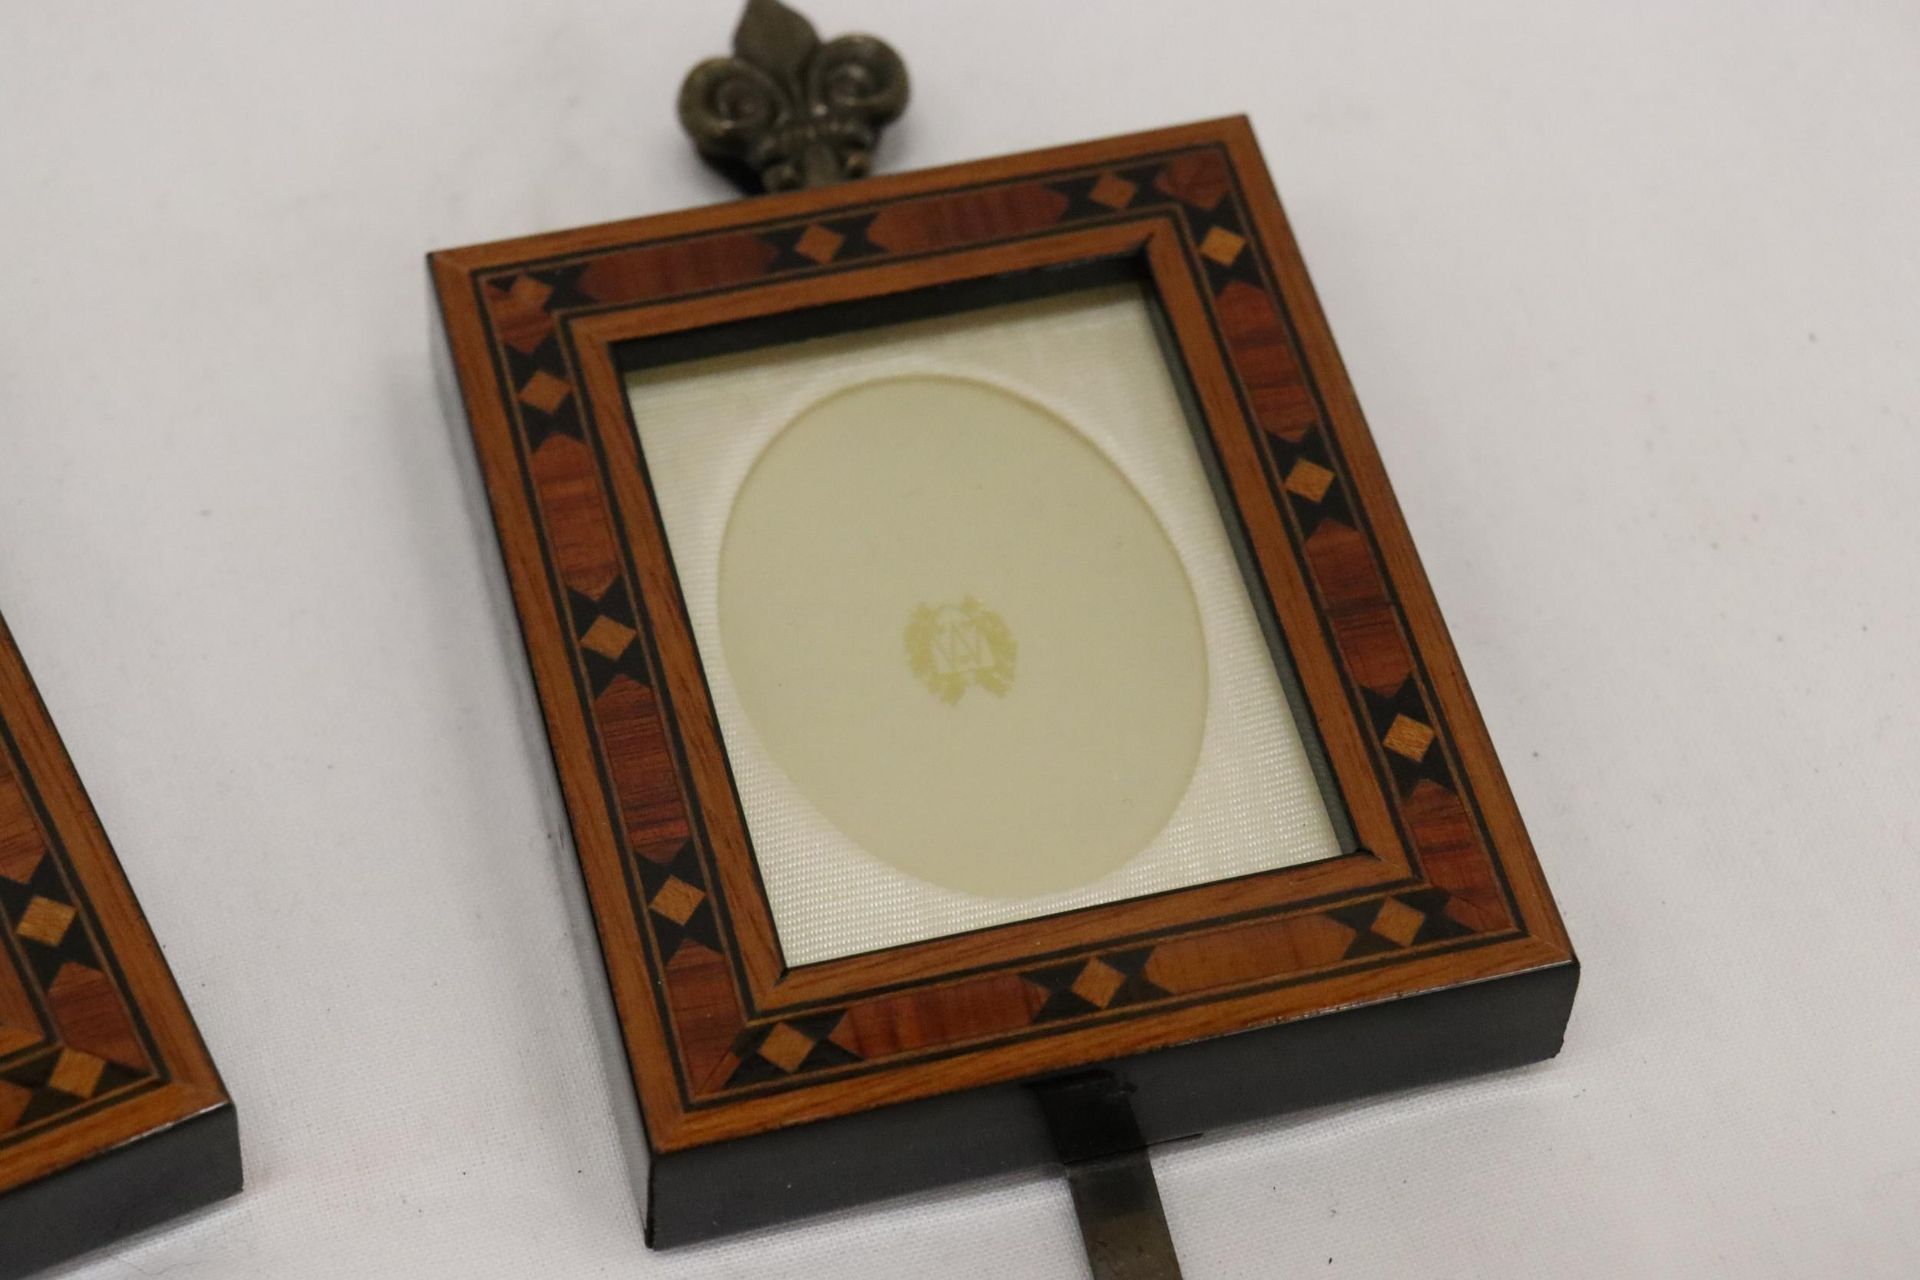 A PAIR OF SMALL INLAID WOODEN PHOTO FRAMES, 7CM X 8CM - Image 5 of 5